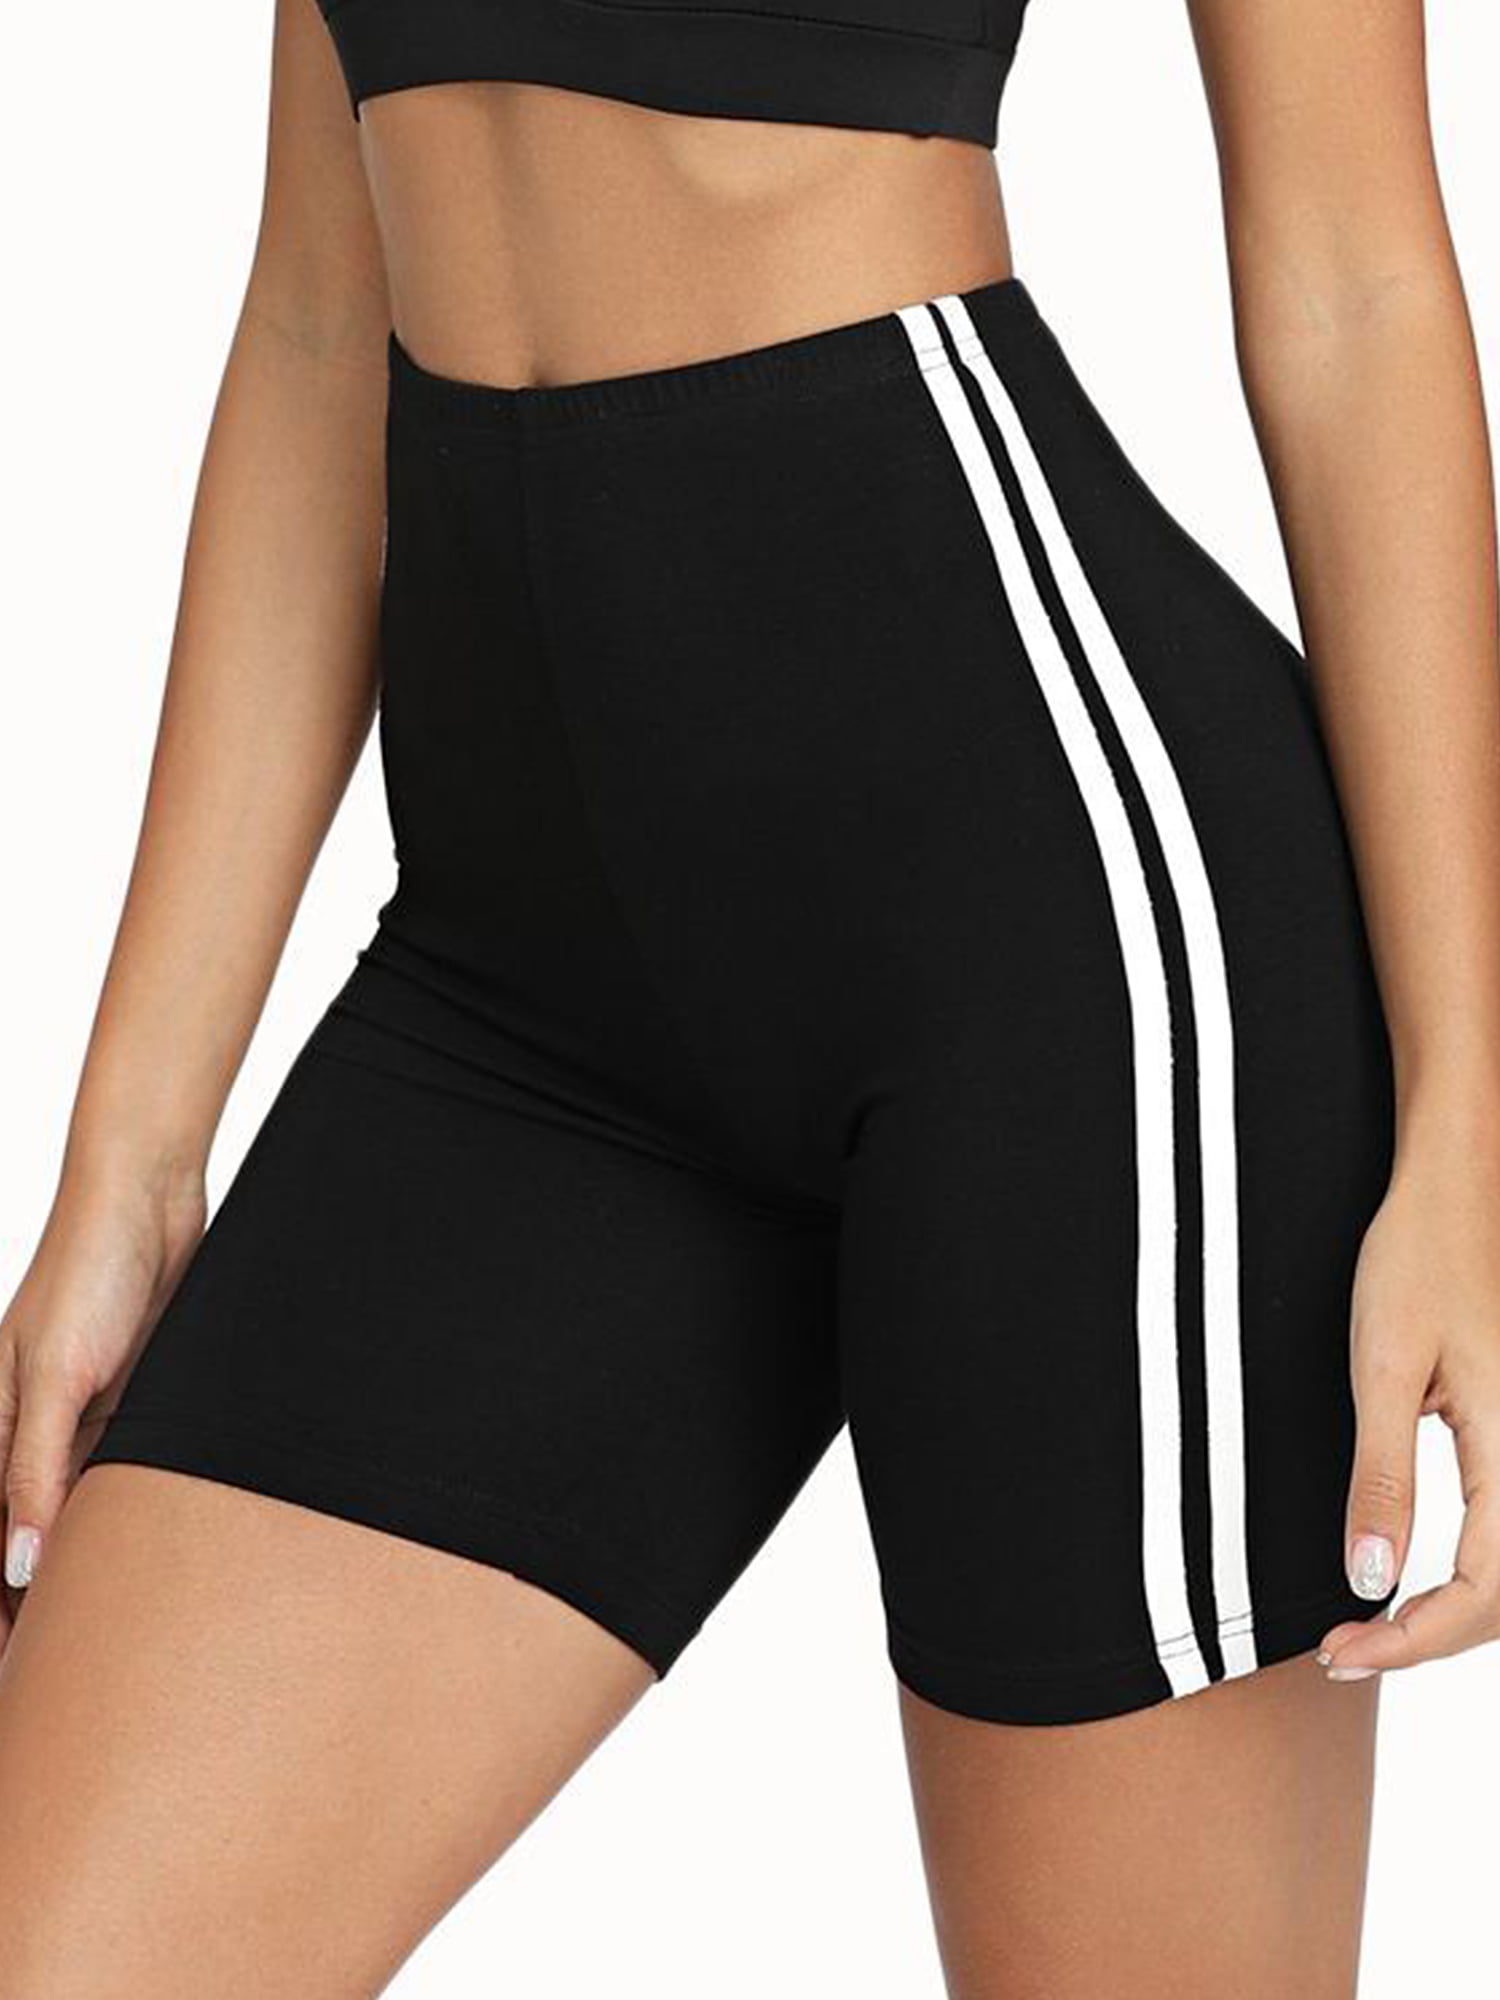 REORIA Womens High Waist Yoga Shorts Pants Tummy Control Athletic Workout Running Shorts with Pockets